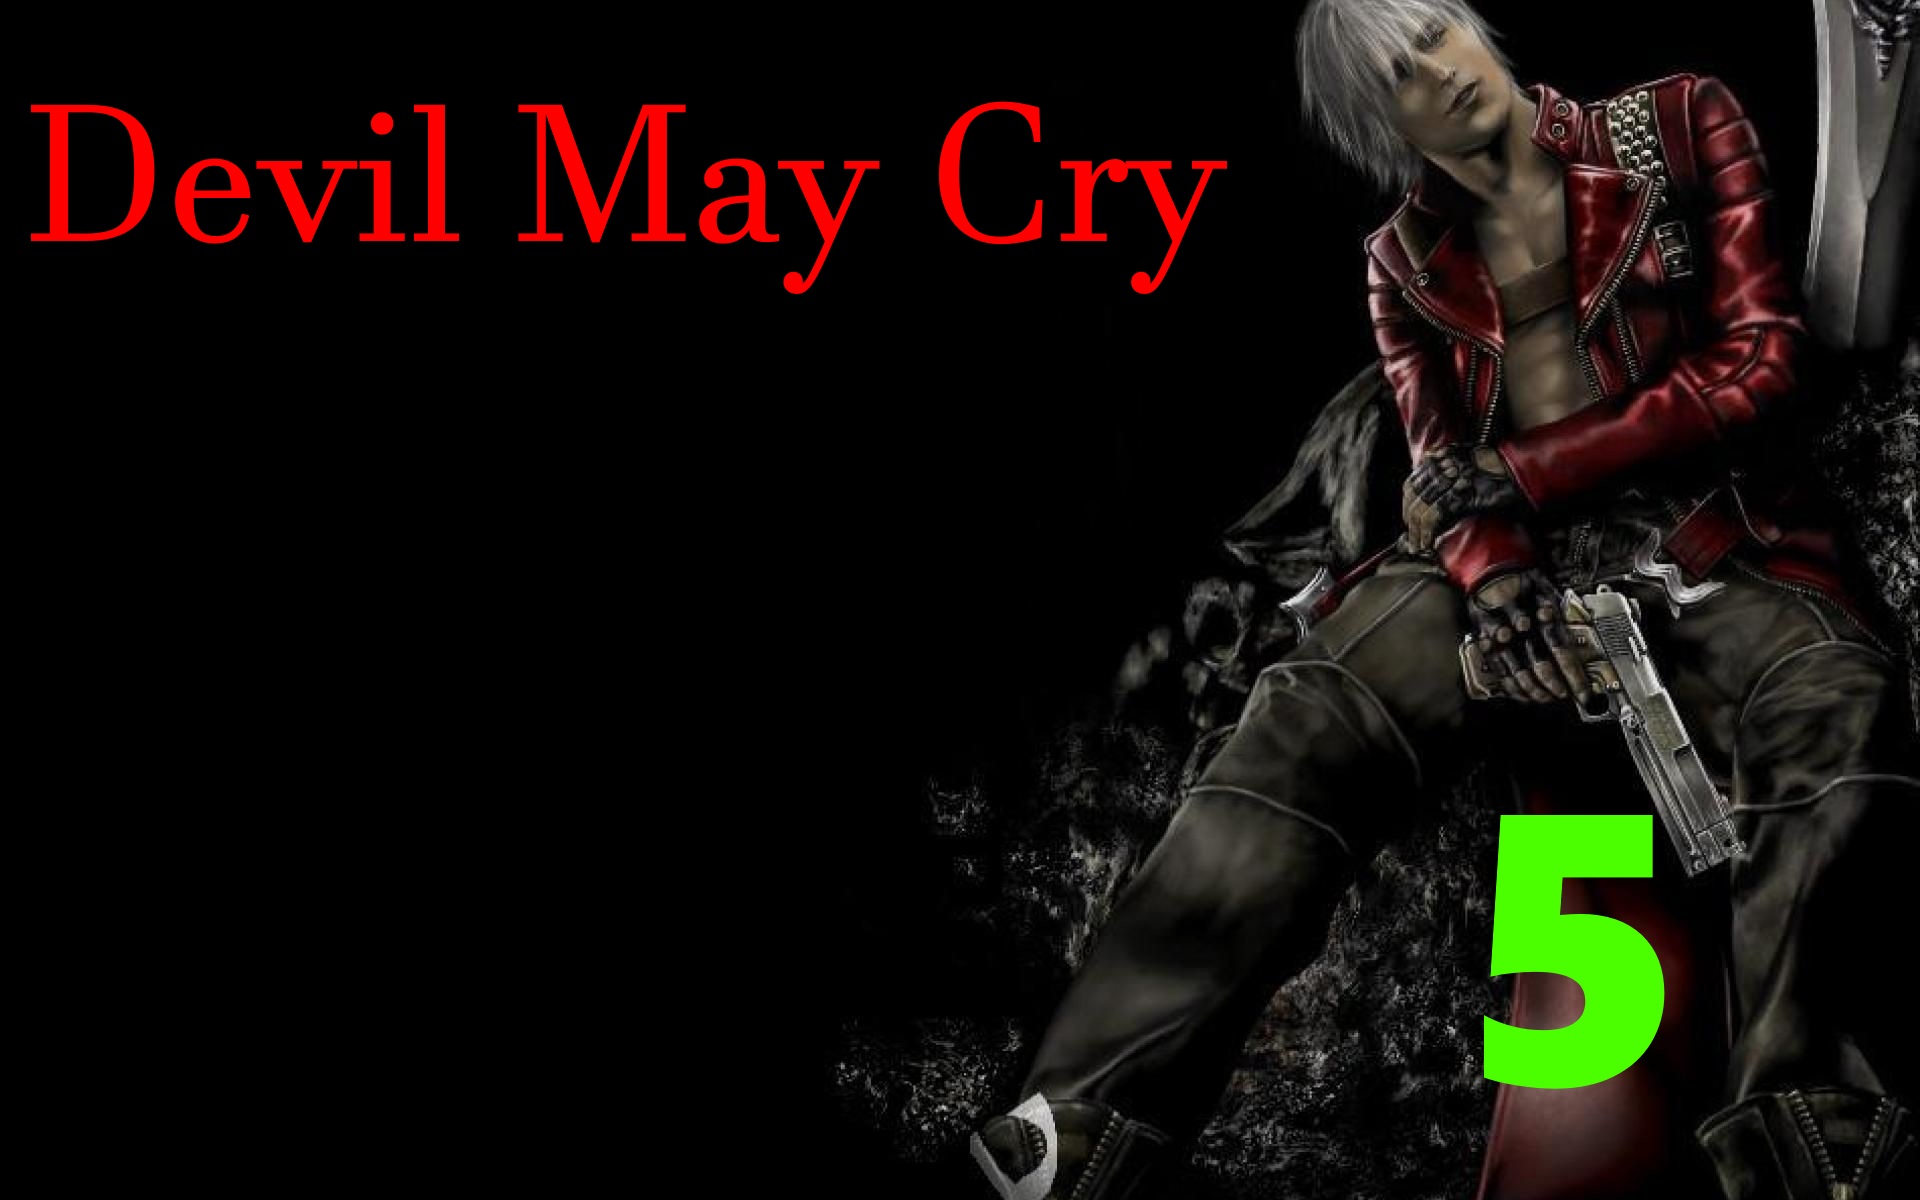 Devil may cry 3 steam not found